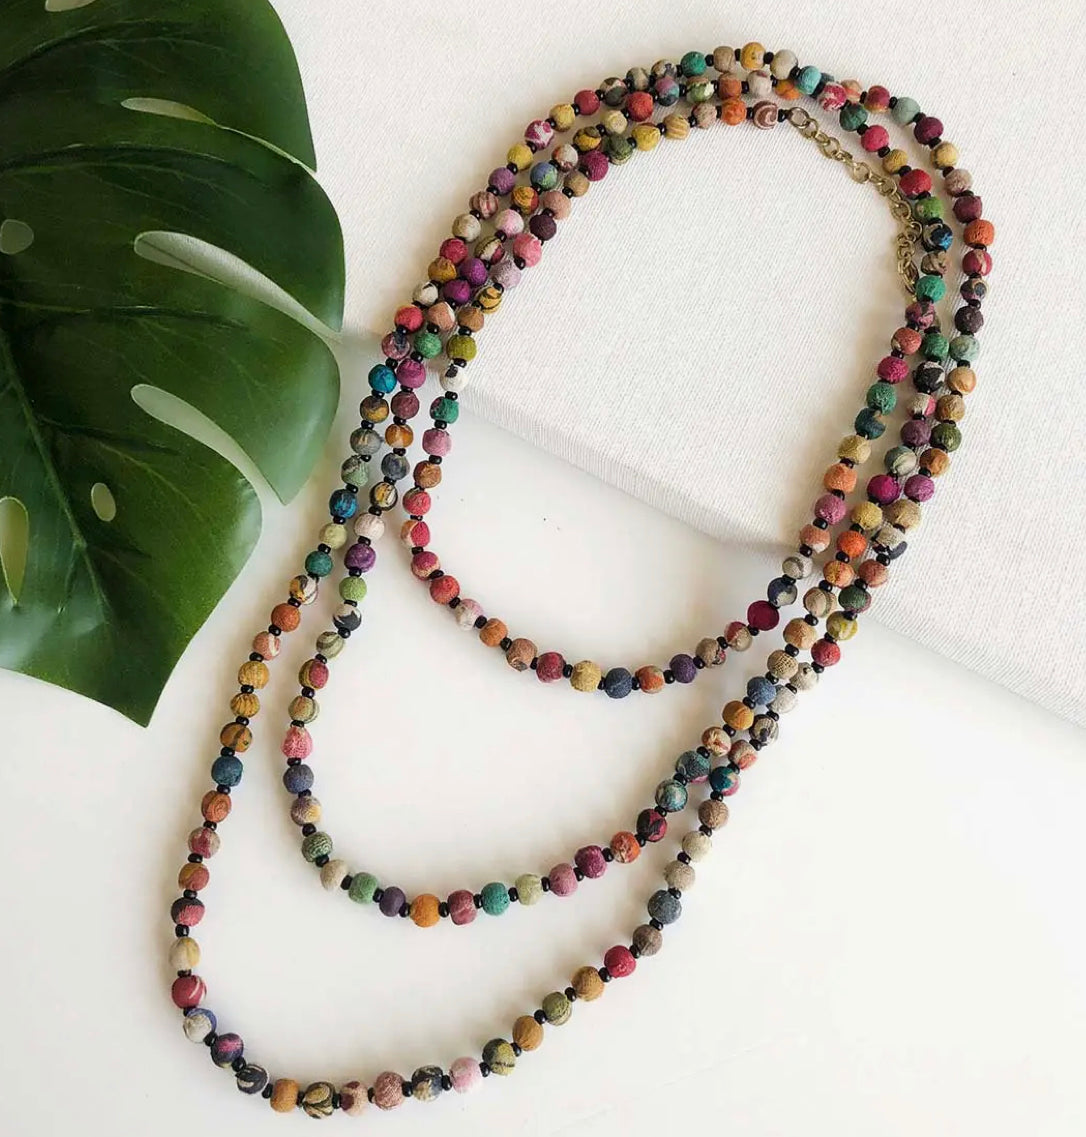 Colorful Beaded Necklace 24in. Fair Trade india